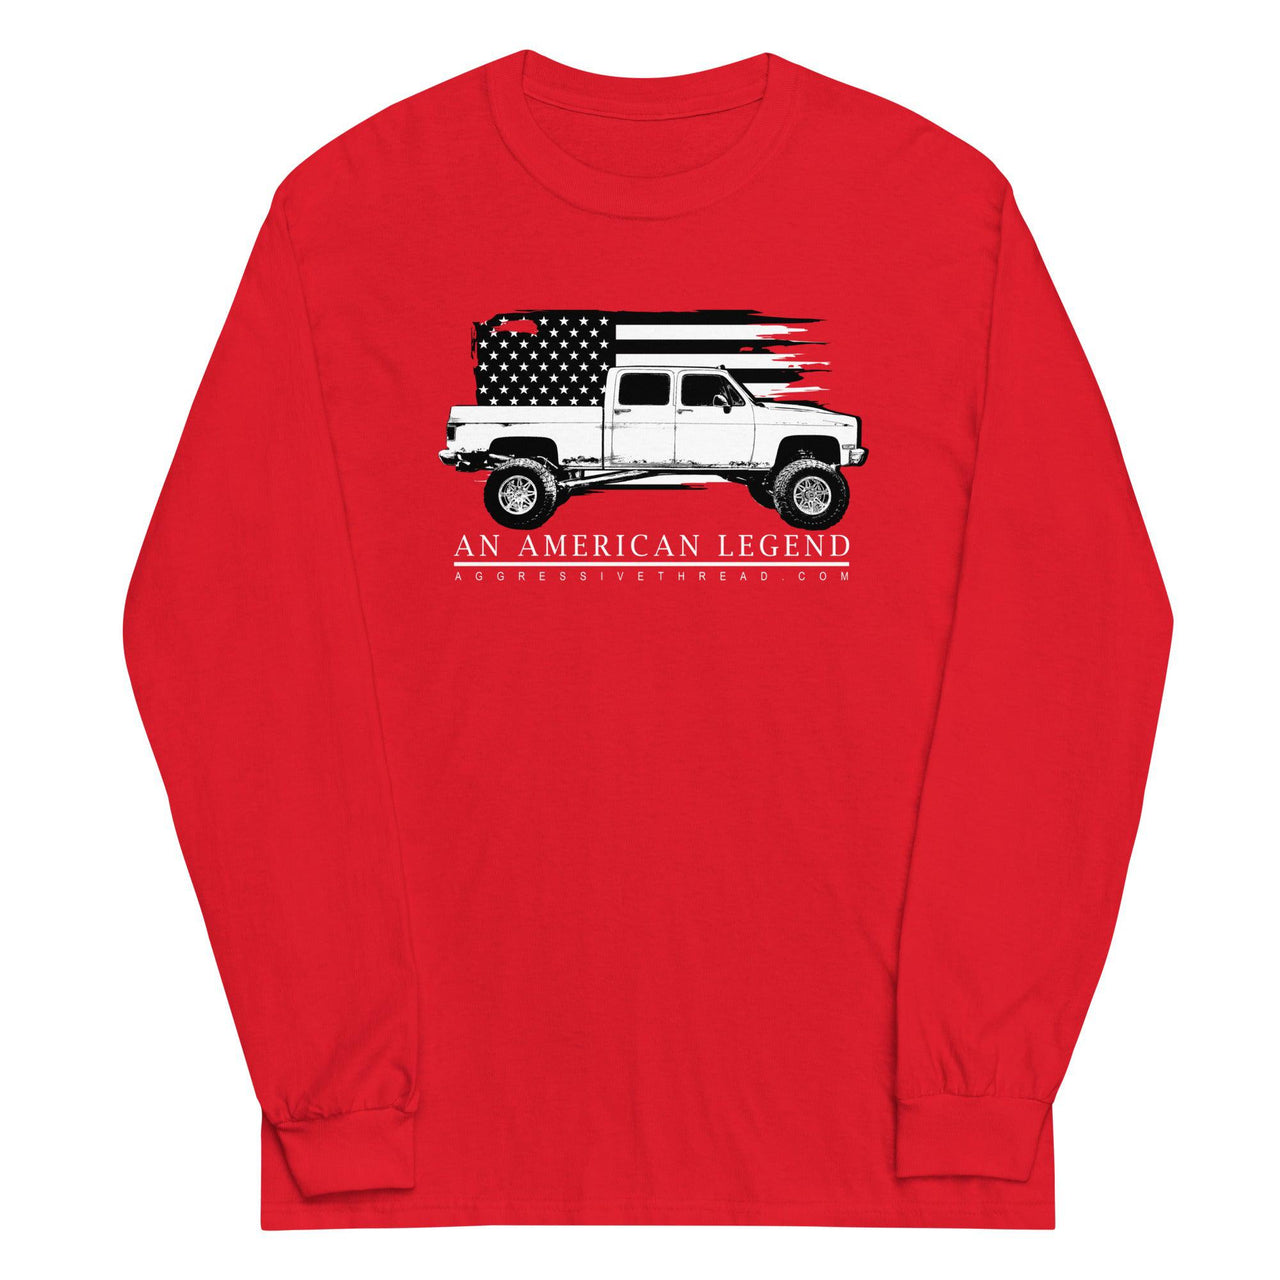 Crew Cab Square Body Truck Long Sleeve T-Shirt in red